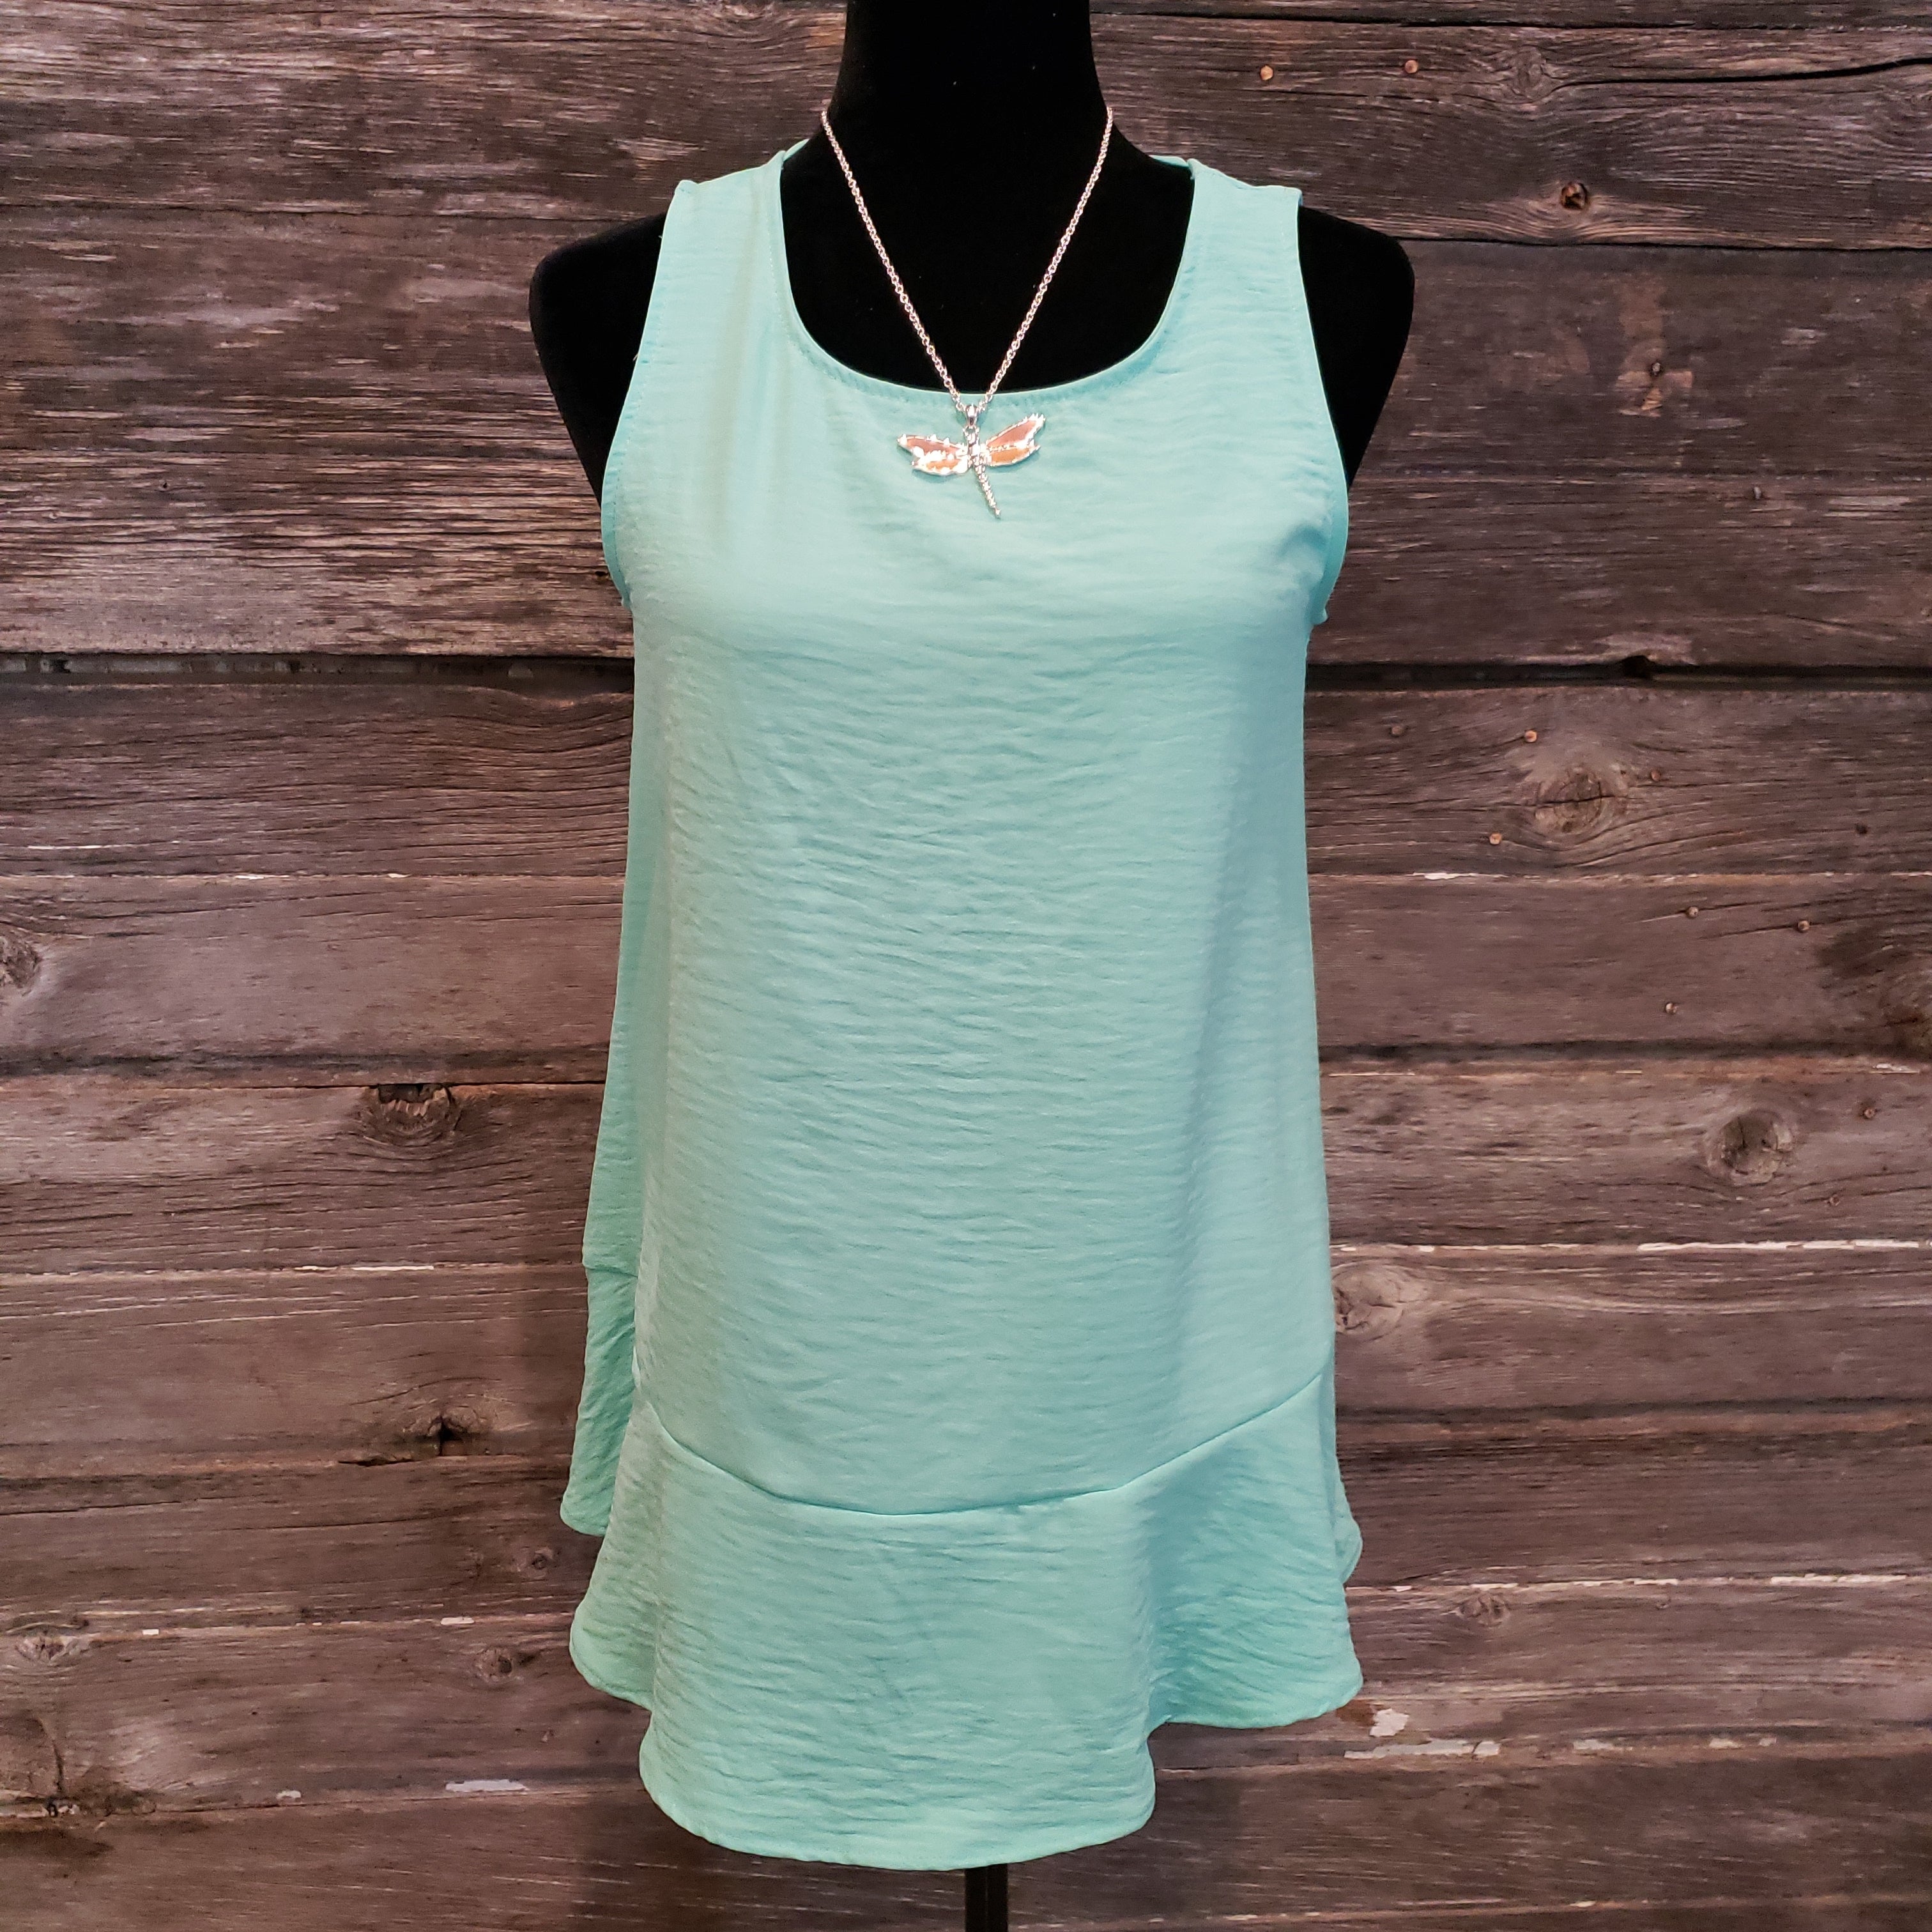 Mint strappy tank top